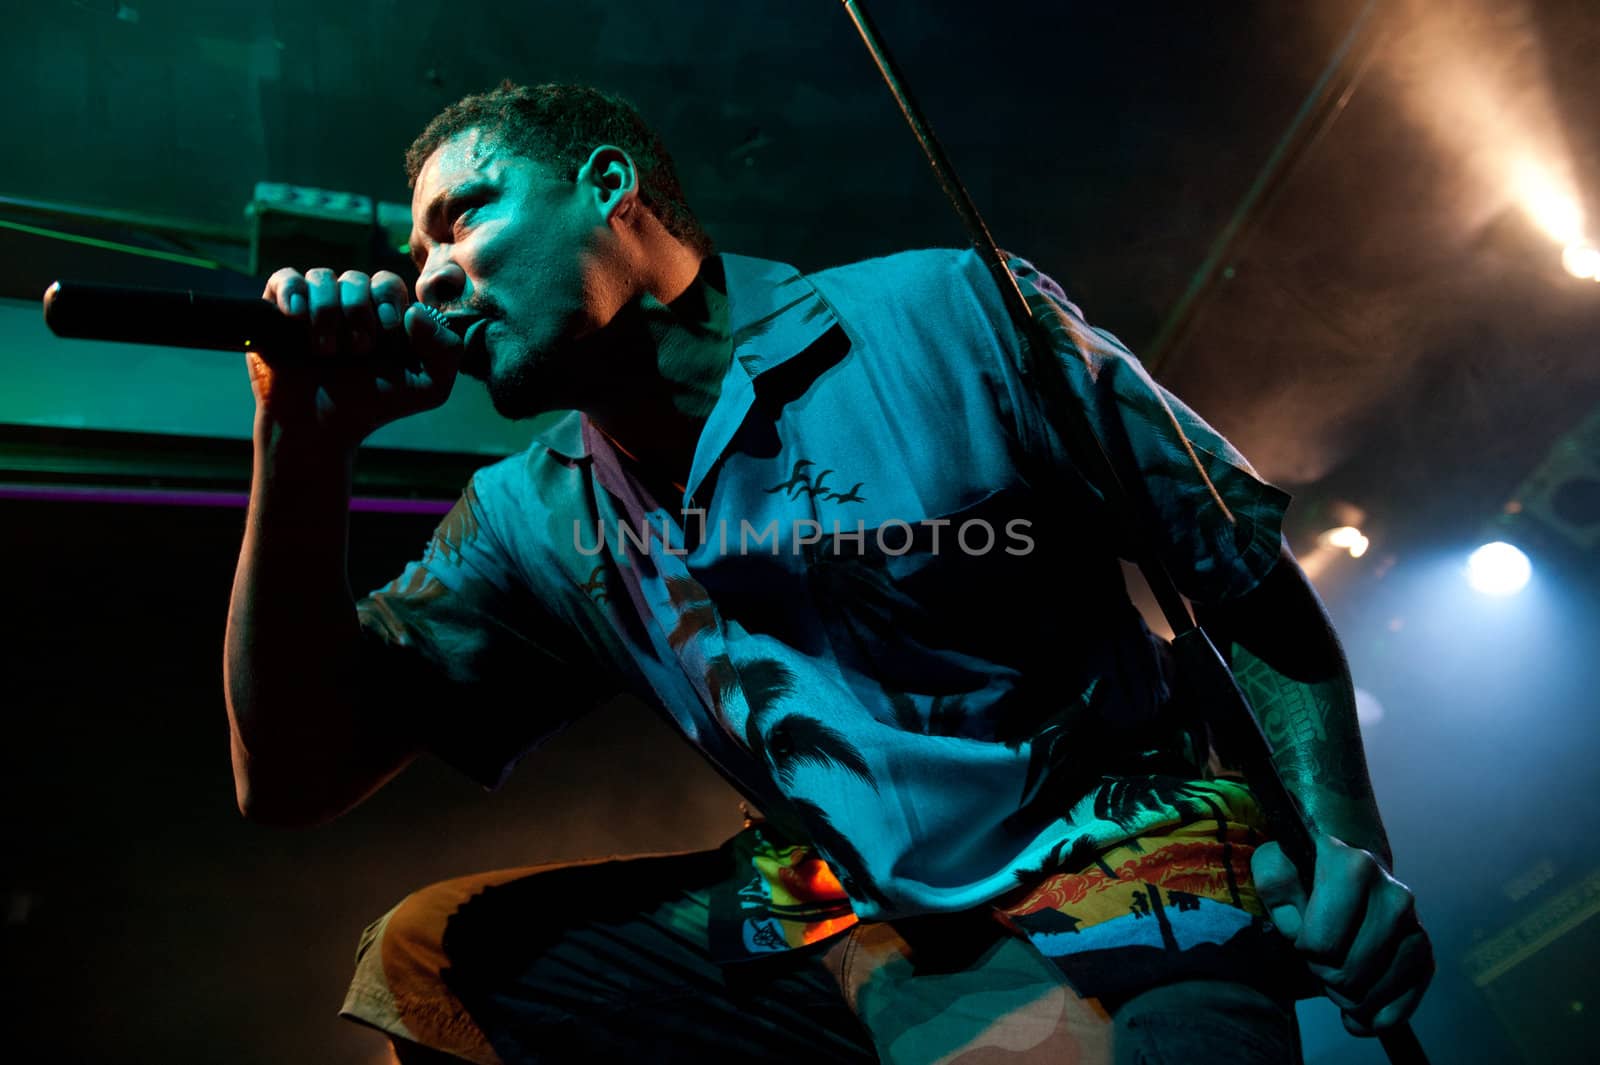 CANARY ISLANDS - DECEMBER 3: Singer Maurice Adams, from the Norwegian band Breed, performing onstage during Hard &amp; Heavy Meeting December 3, 2011 in Canary islands,Spain